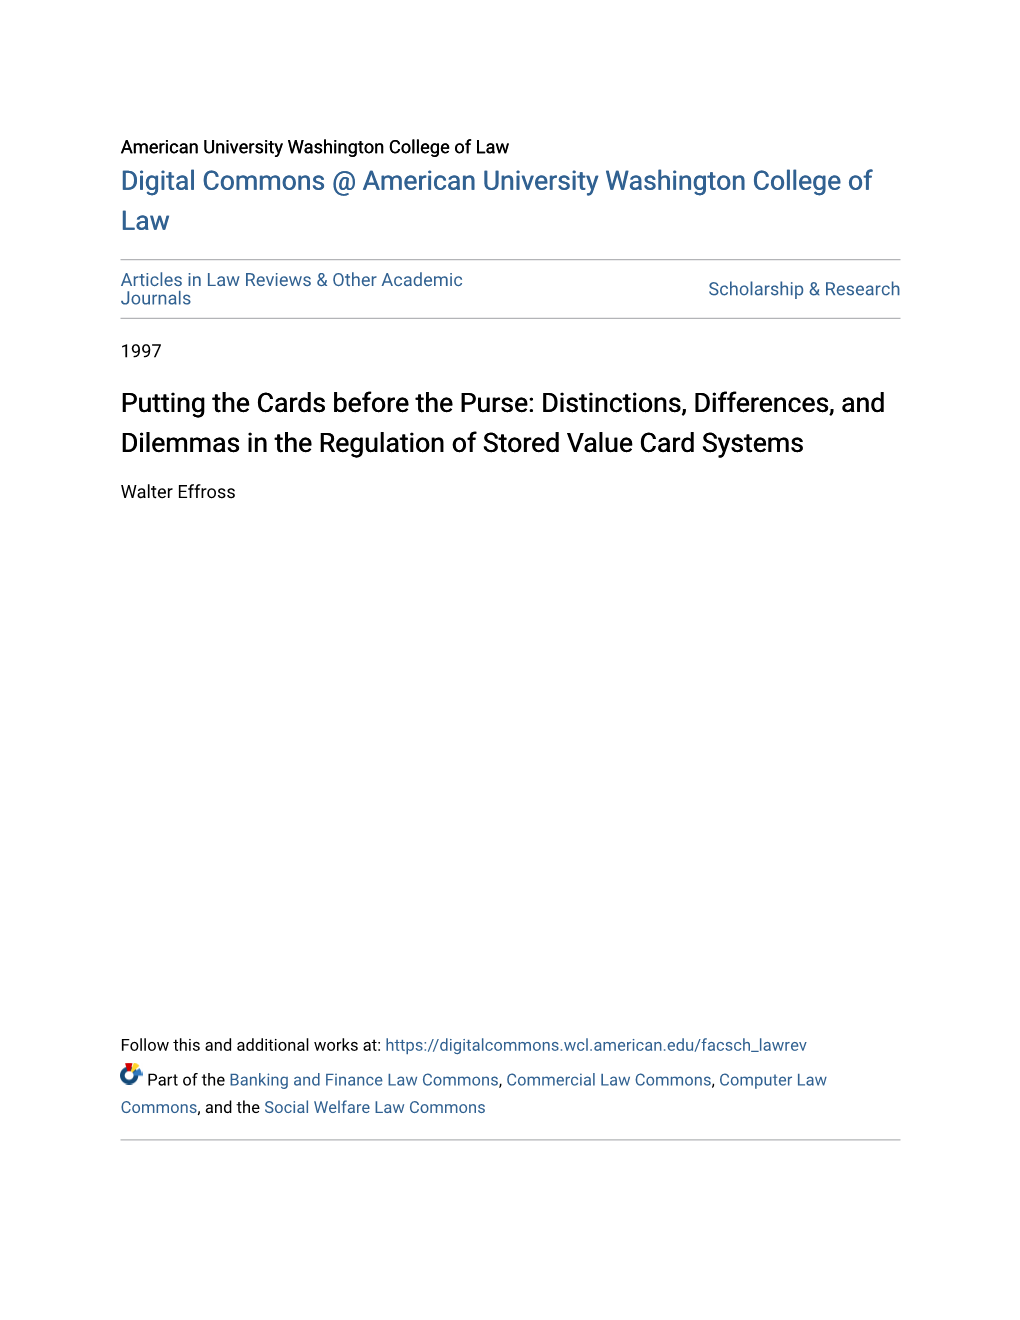 Distinctions, Differences, and Dilemmas in the Regulation of Stored Value Card Systems